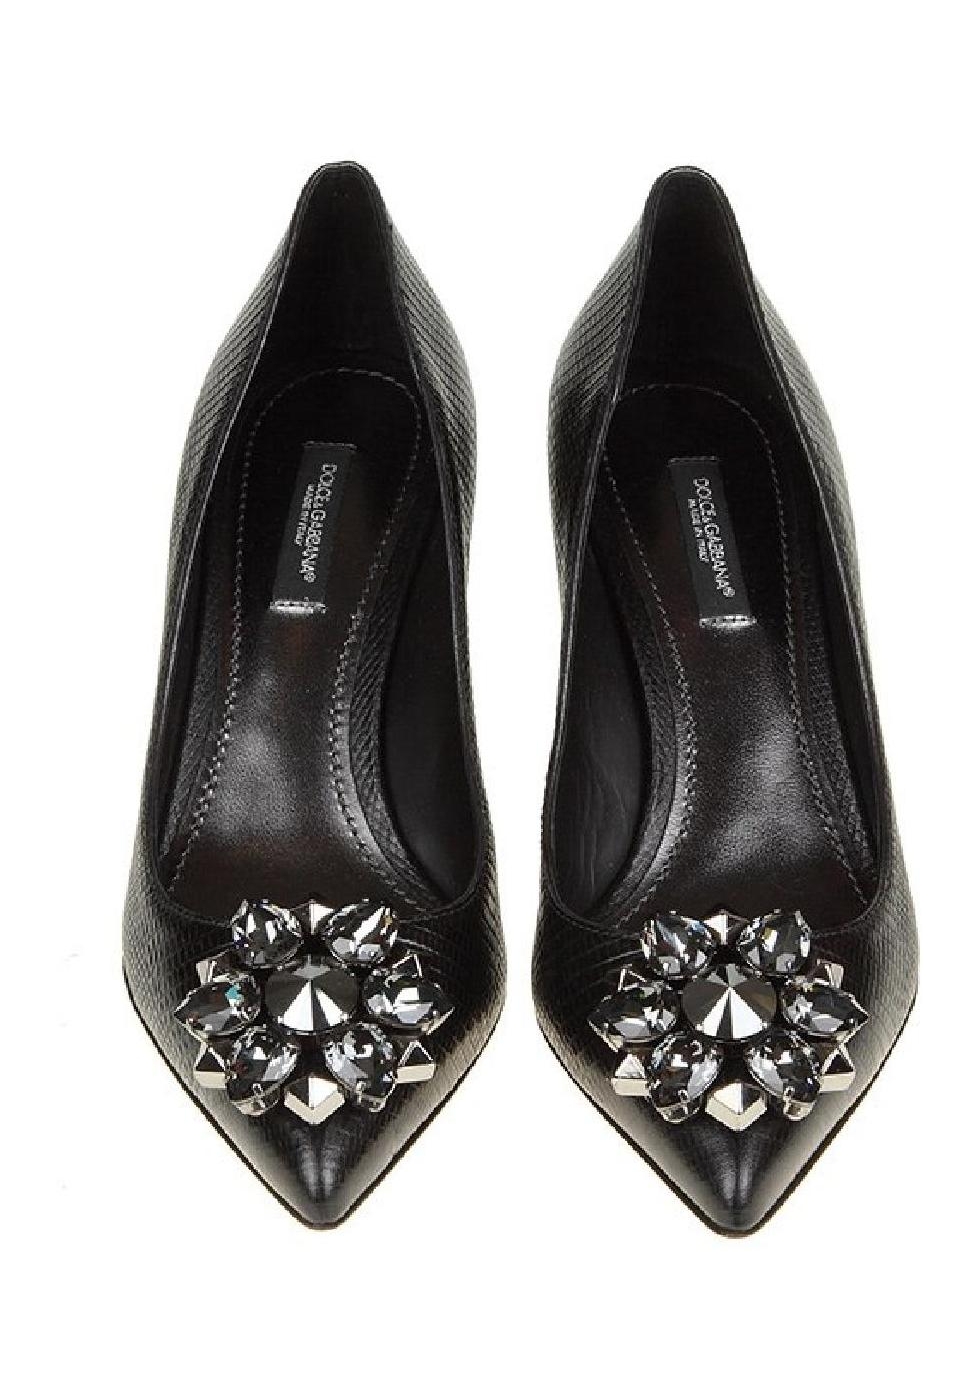 Dolce&Gabbana heels pumps in black leather with crystals pointed toe ...